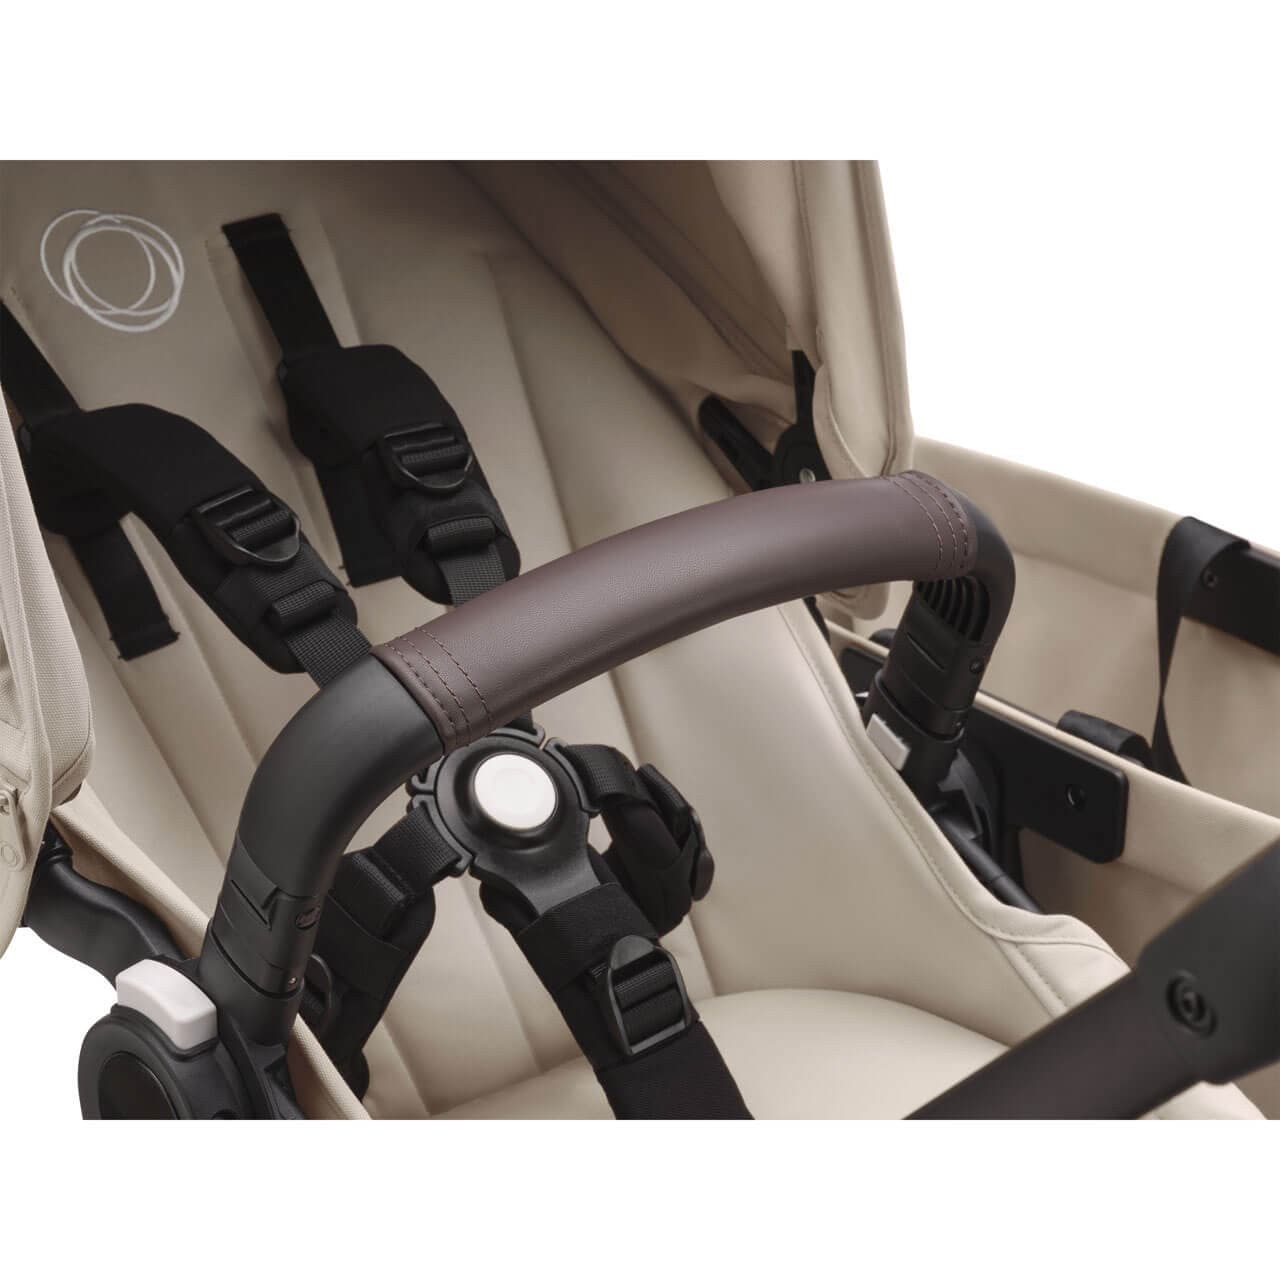 Bugaboo Donkey 5 Twin Complete Travel System + Turtle Air - Black/Desert Taupe - For Your Little One